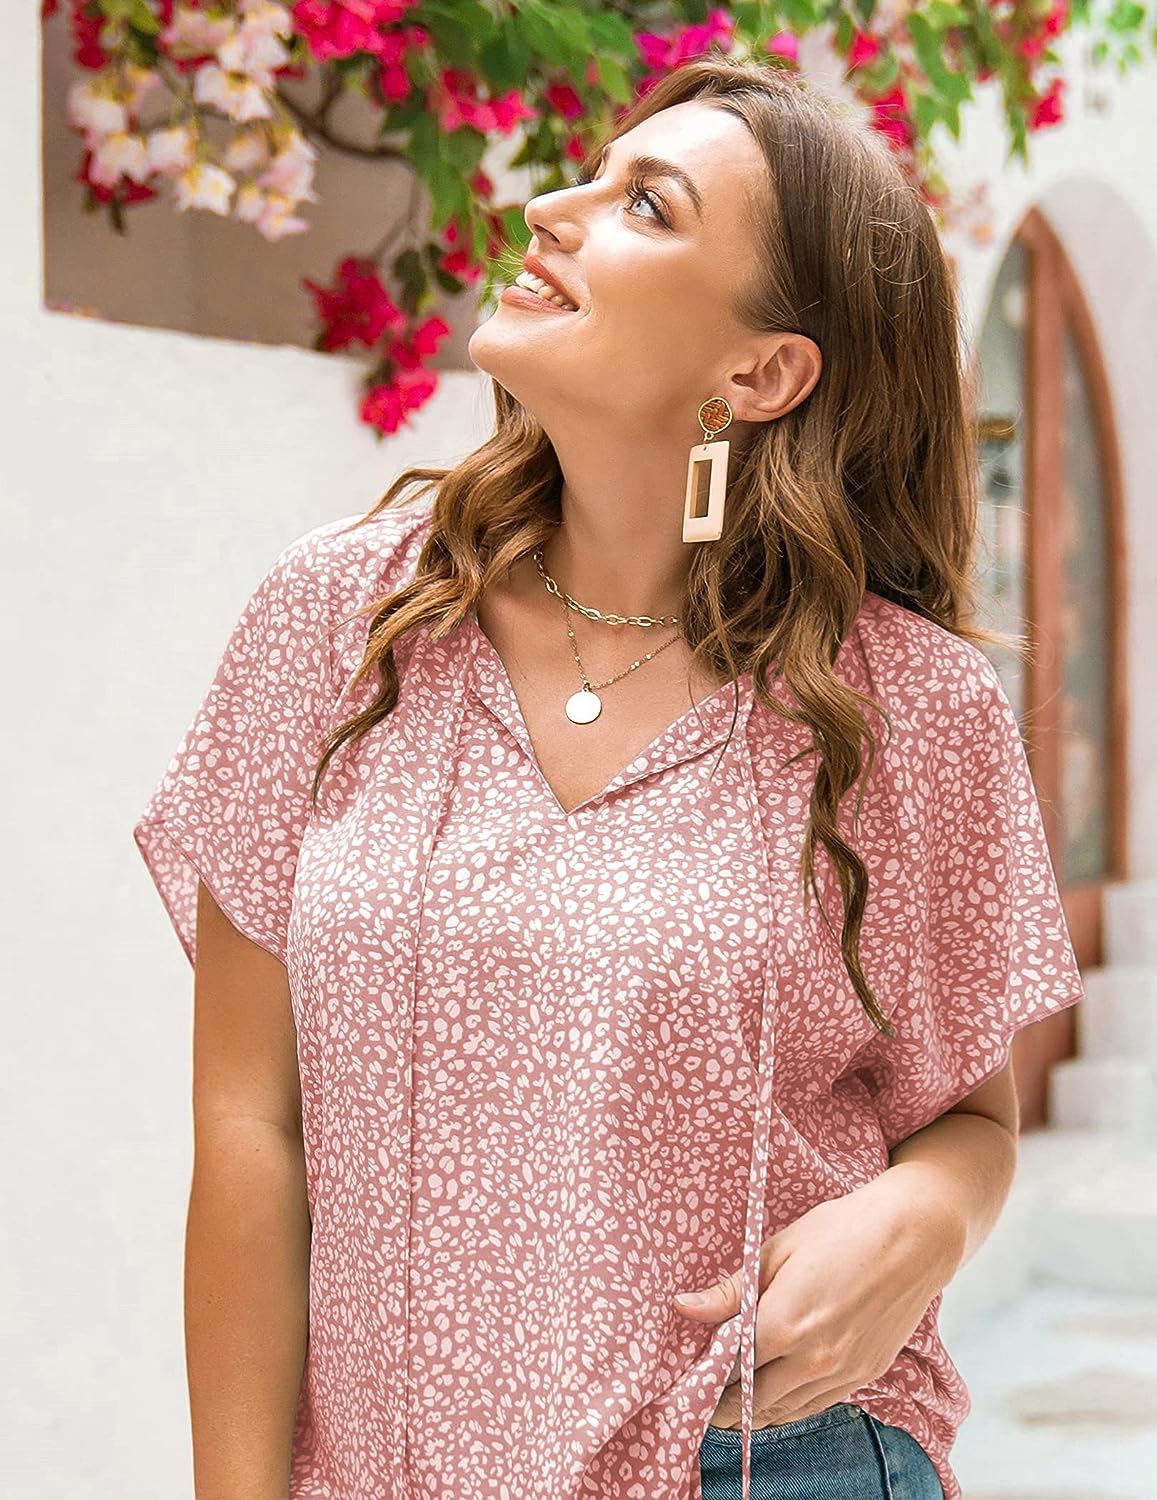 Stay Stylish and Comfortable with IN'VOLAND Womens Plus Size Boho Floral Print Tops